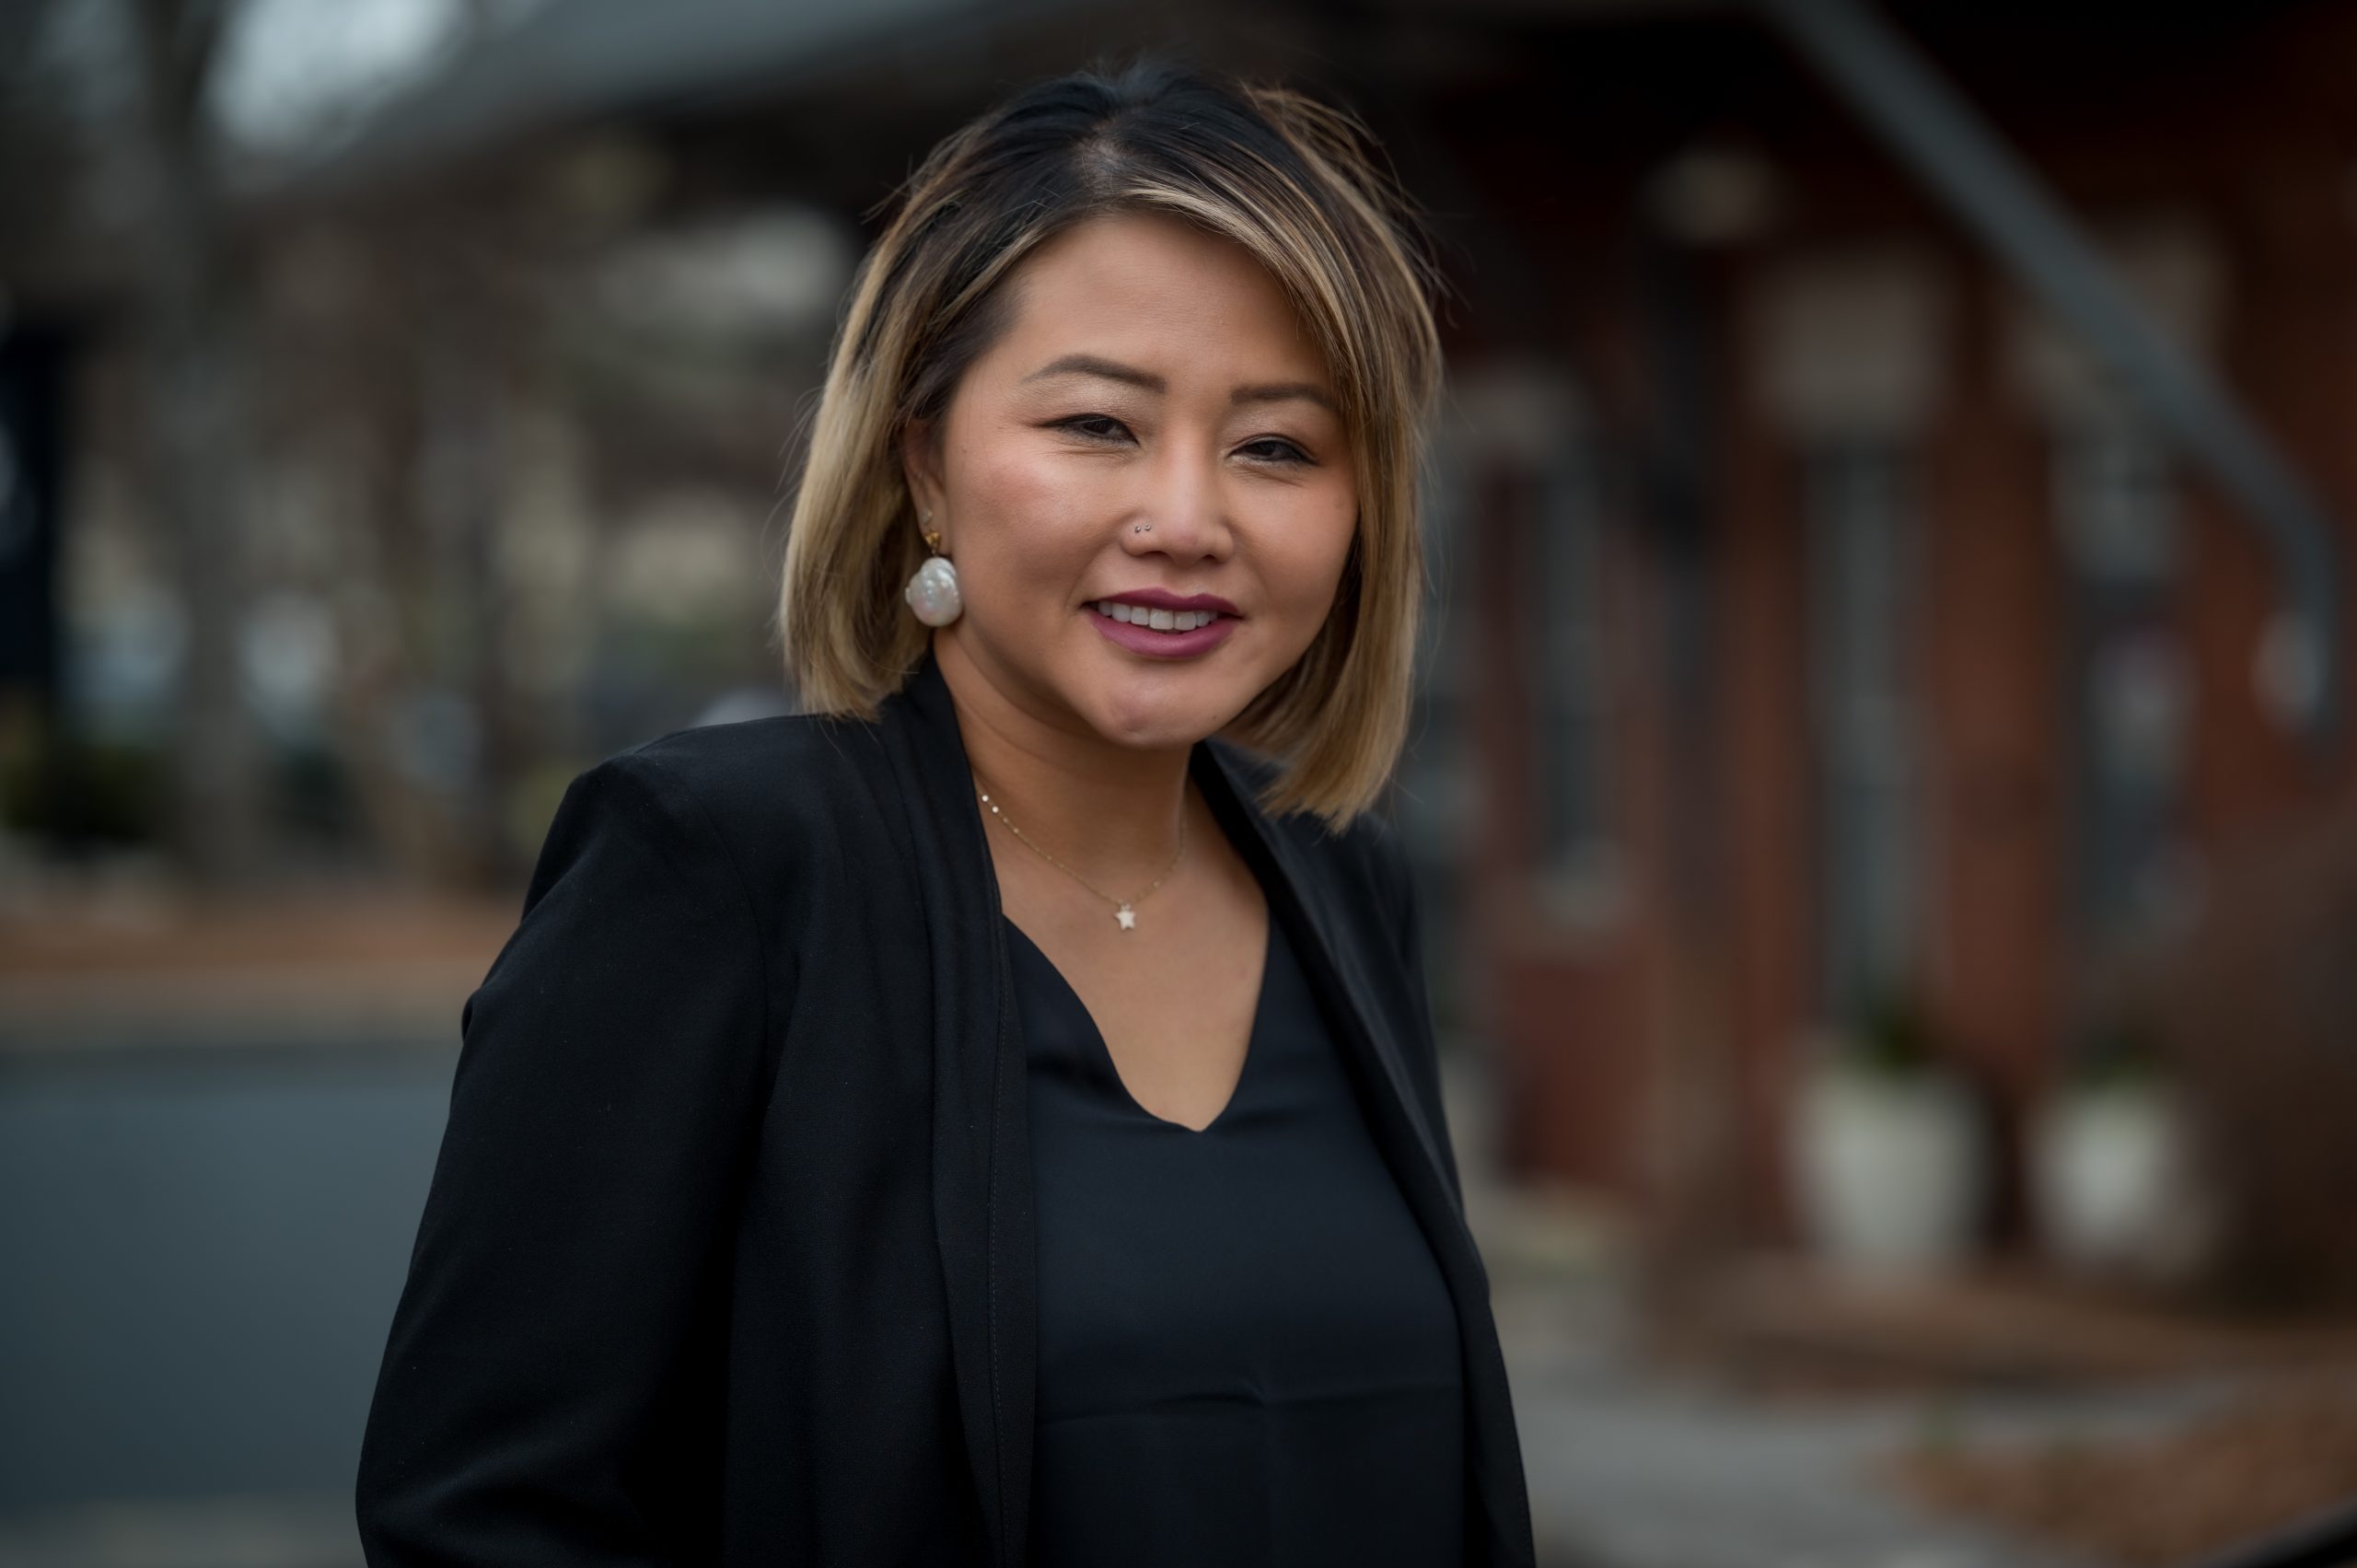 Tina Chung, Owner and Stylist at LOCKS Salon on Public Square in Cartersville, Georgia